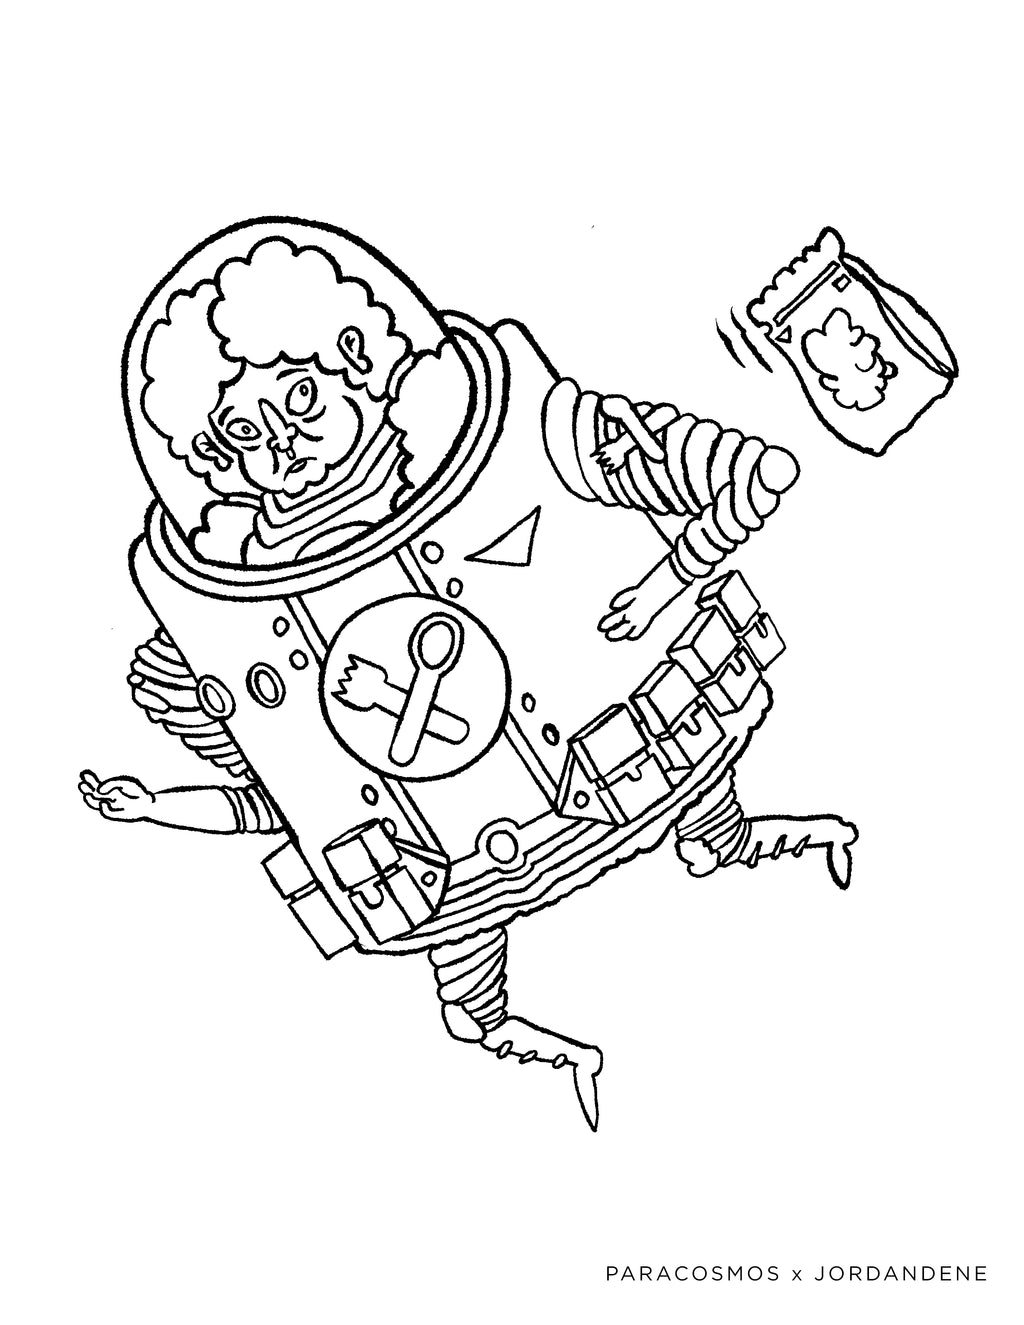 Popping Space Man Free Coloring Page